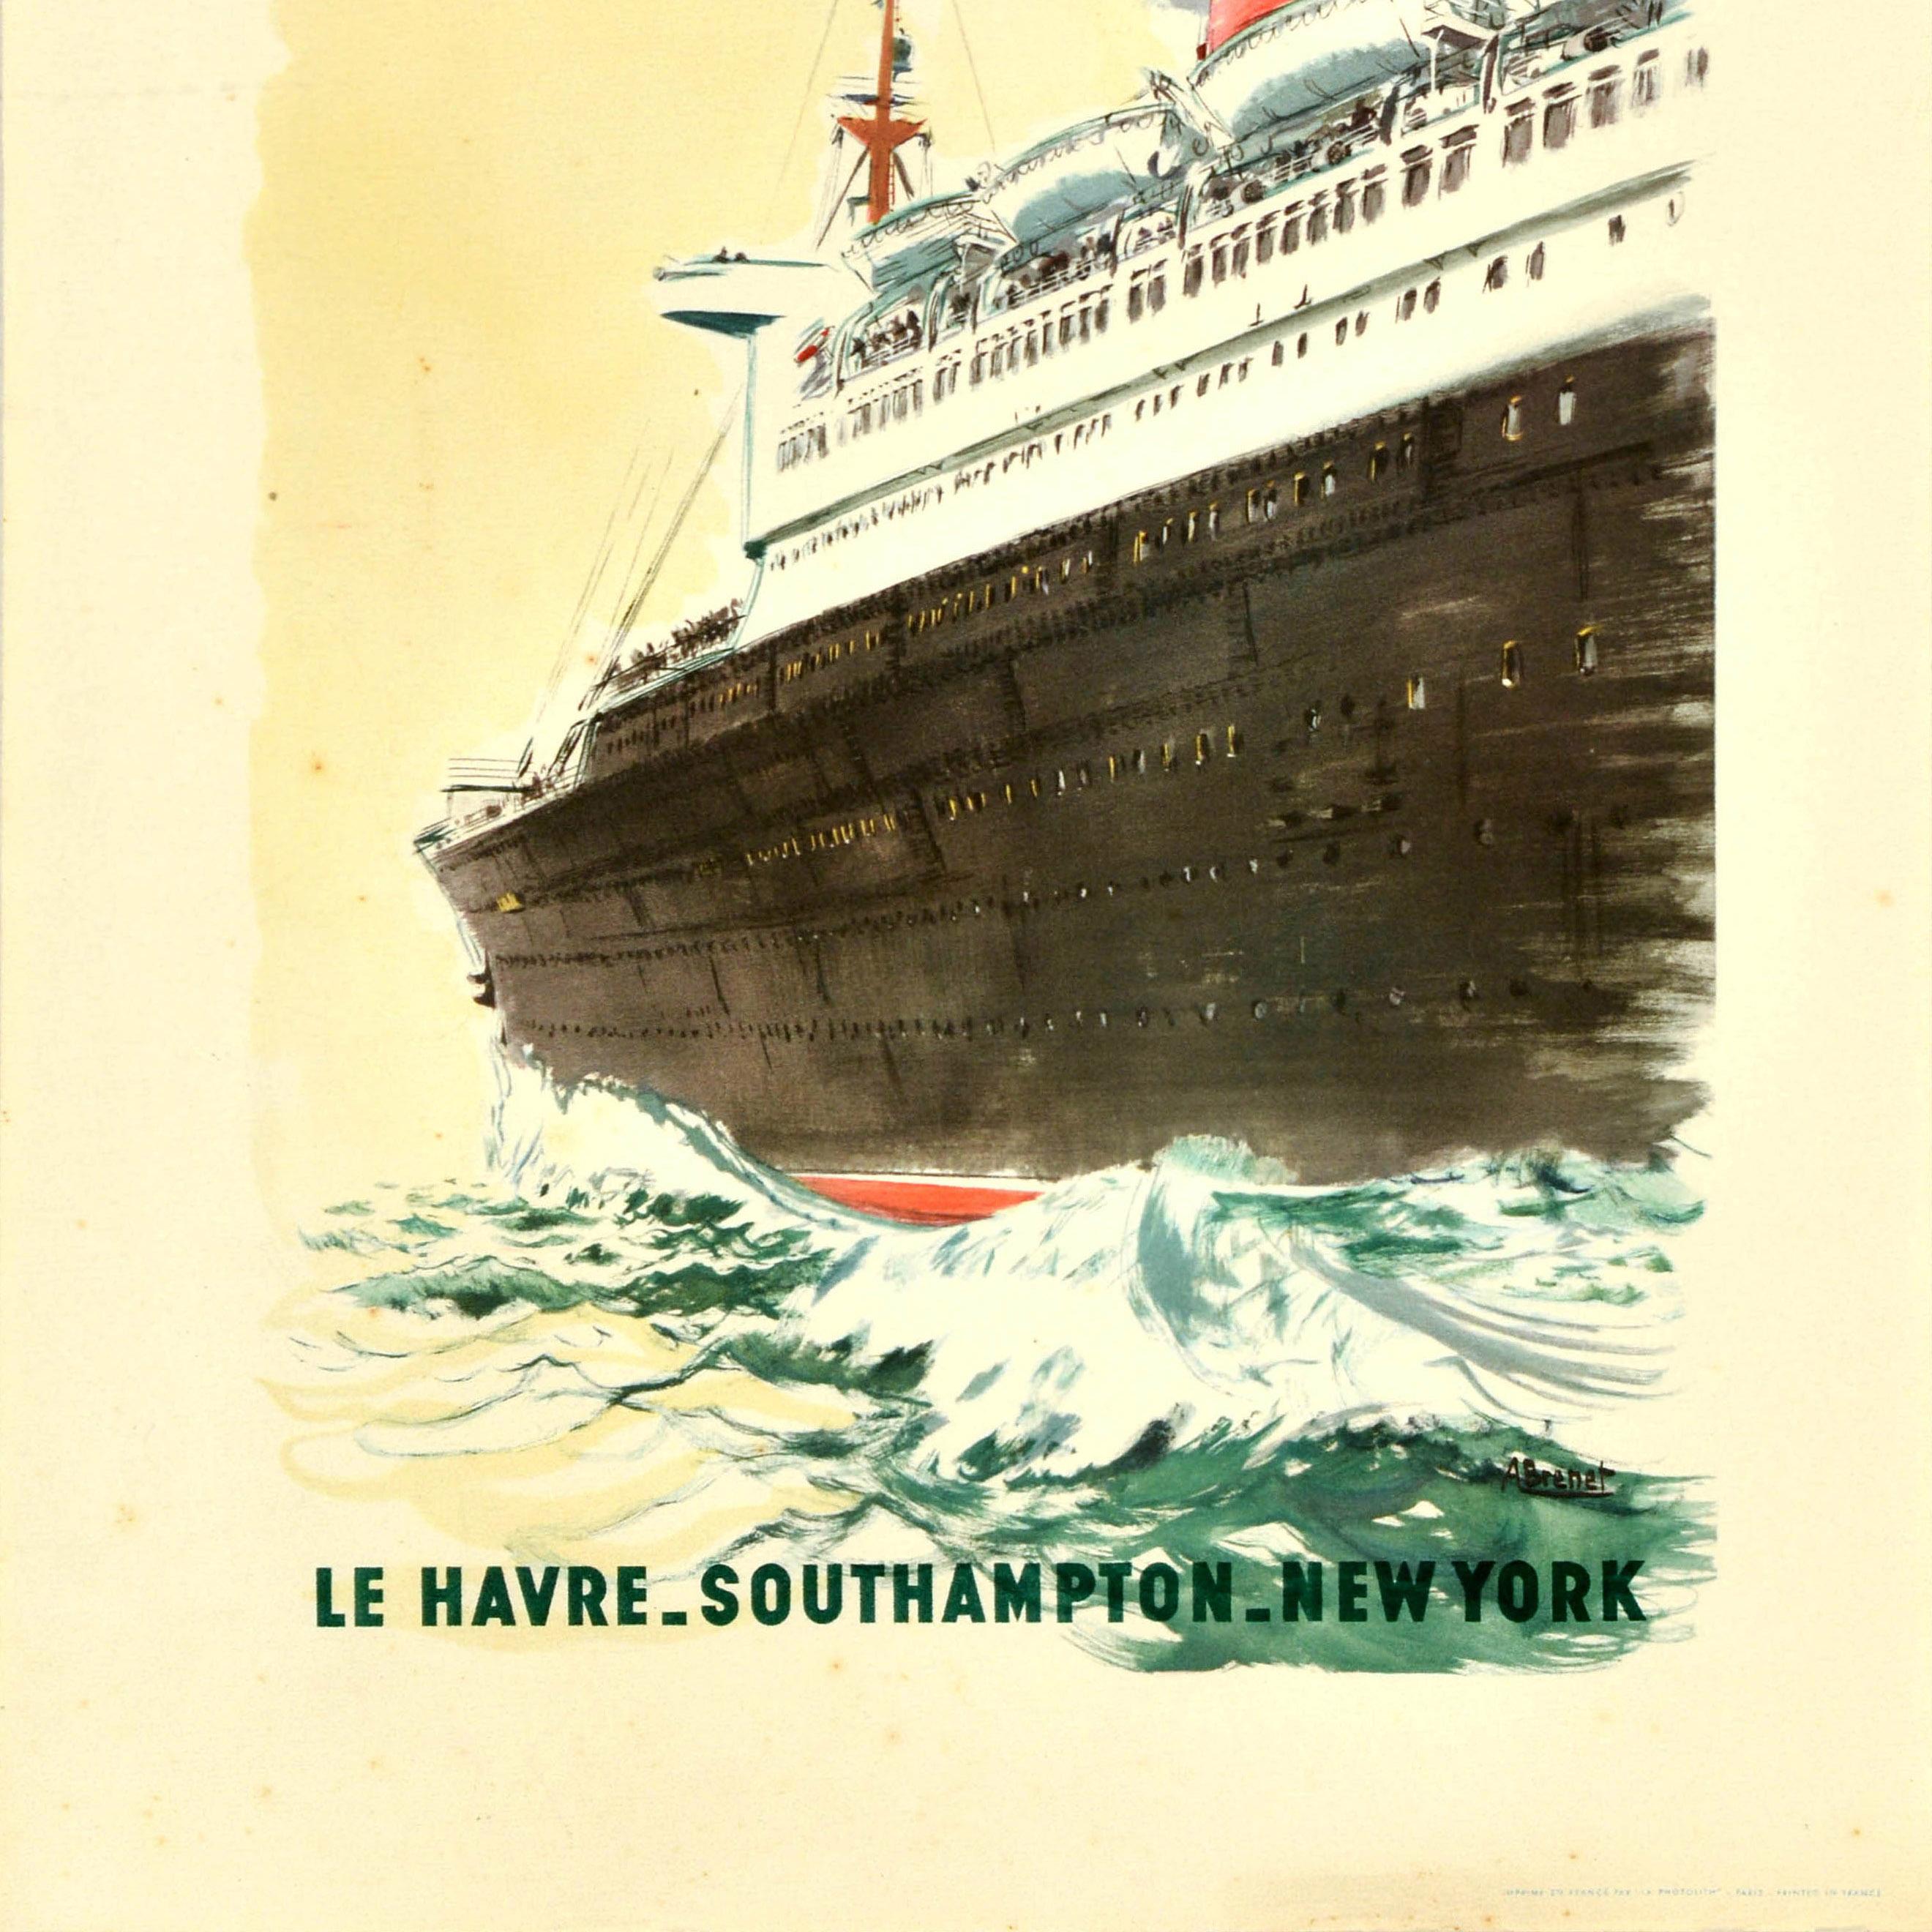 Original vintage cruise travel poster - Cie Gle Transatlantique French Line Le Havre Southampton New York - featuring artwork by the French artist Albert Brenet (1903-2005) depicting an ocean liner sailing at sea with the stylised title text above